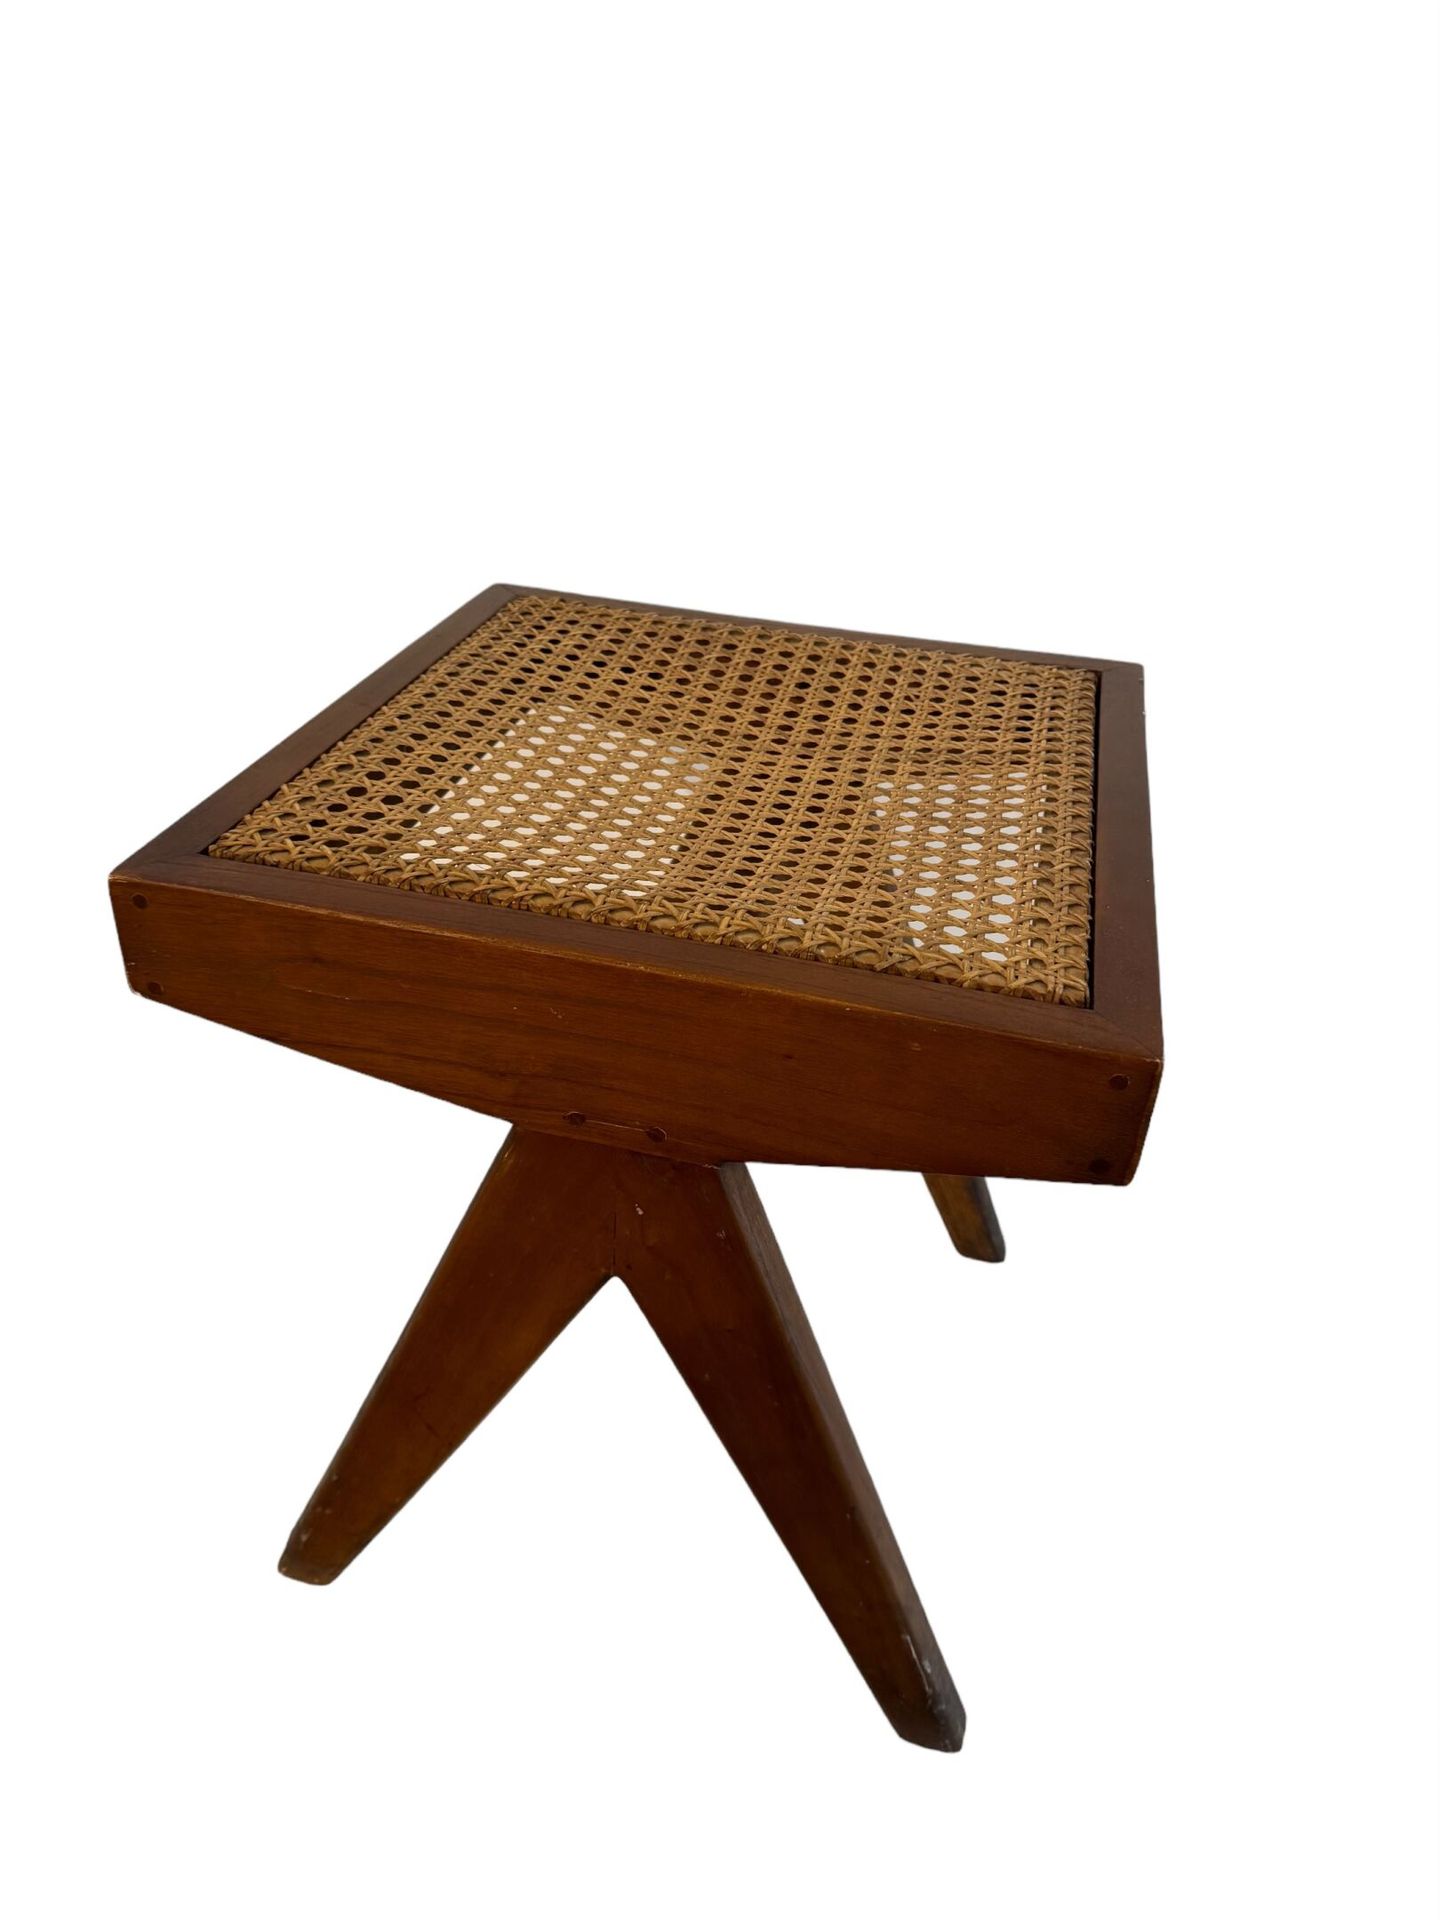 XX siècle XX century
Modernist stool in lacquered wood and rattan cane.
H 45 x W&hellip;